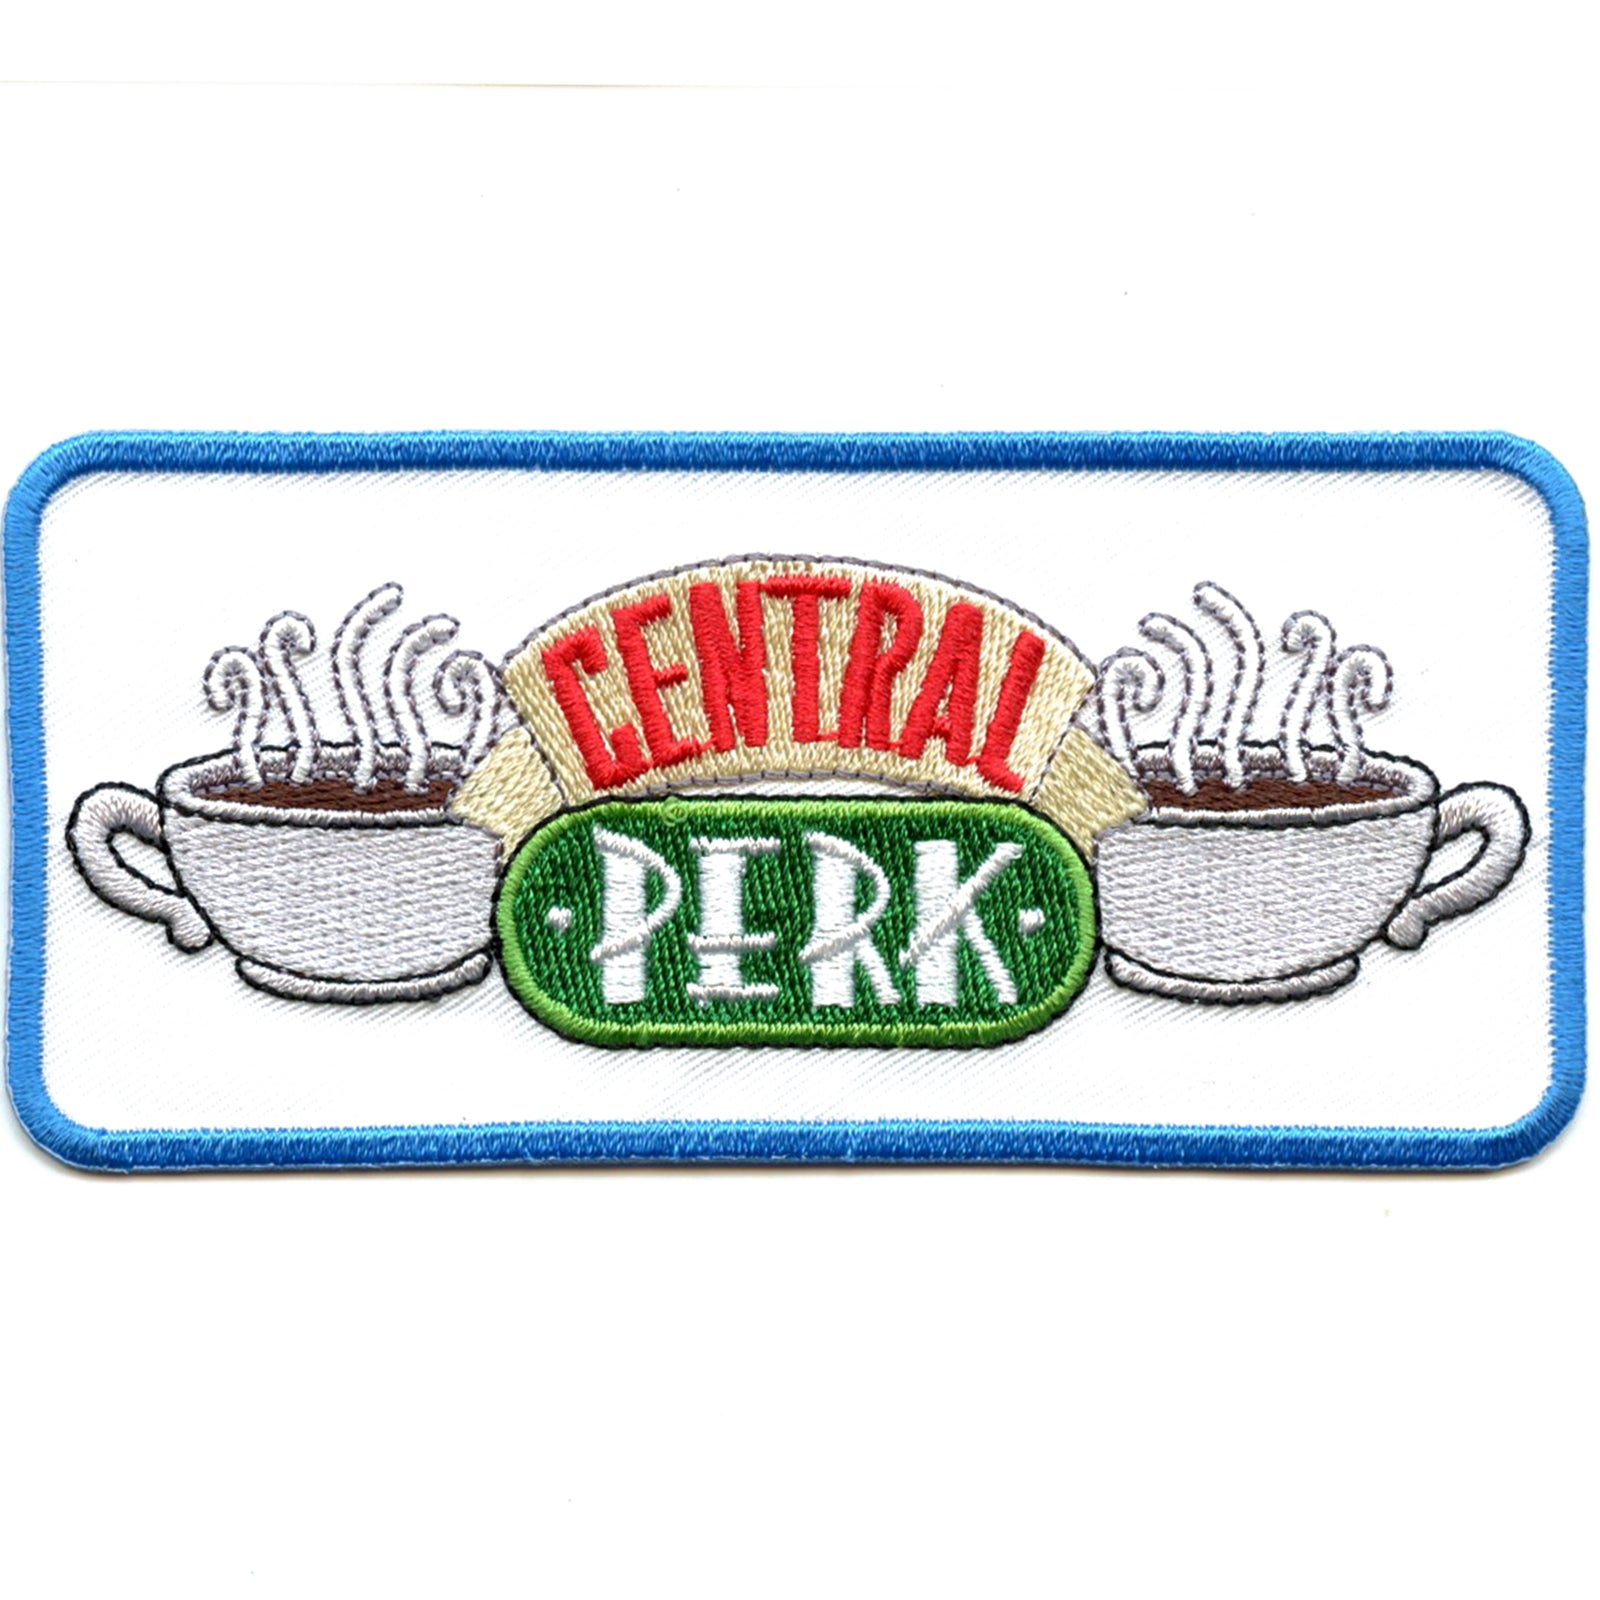 Friends Central Perk Embroidered Iron On Patch 